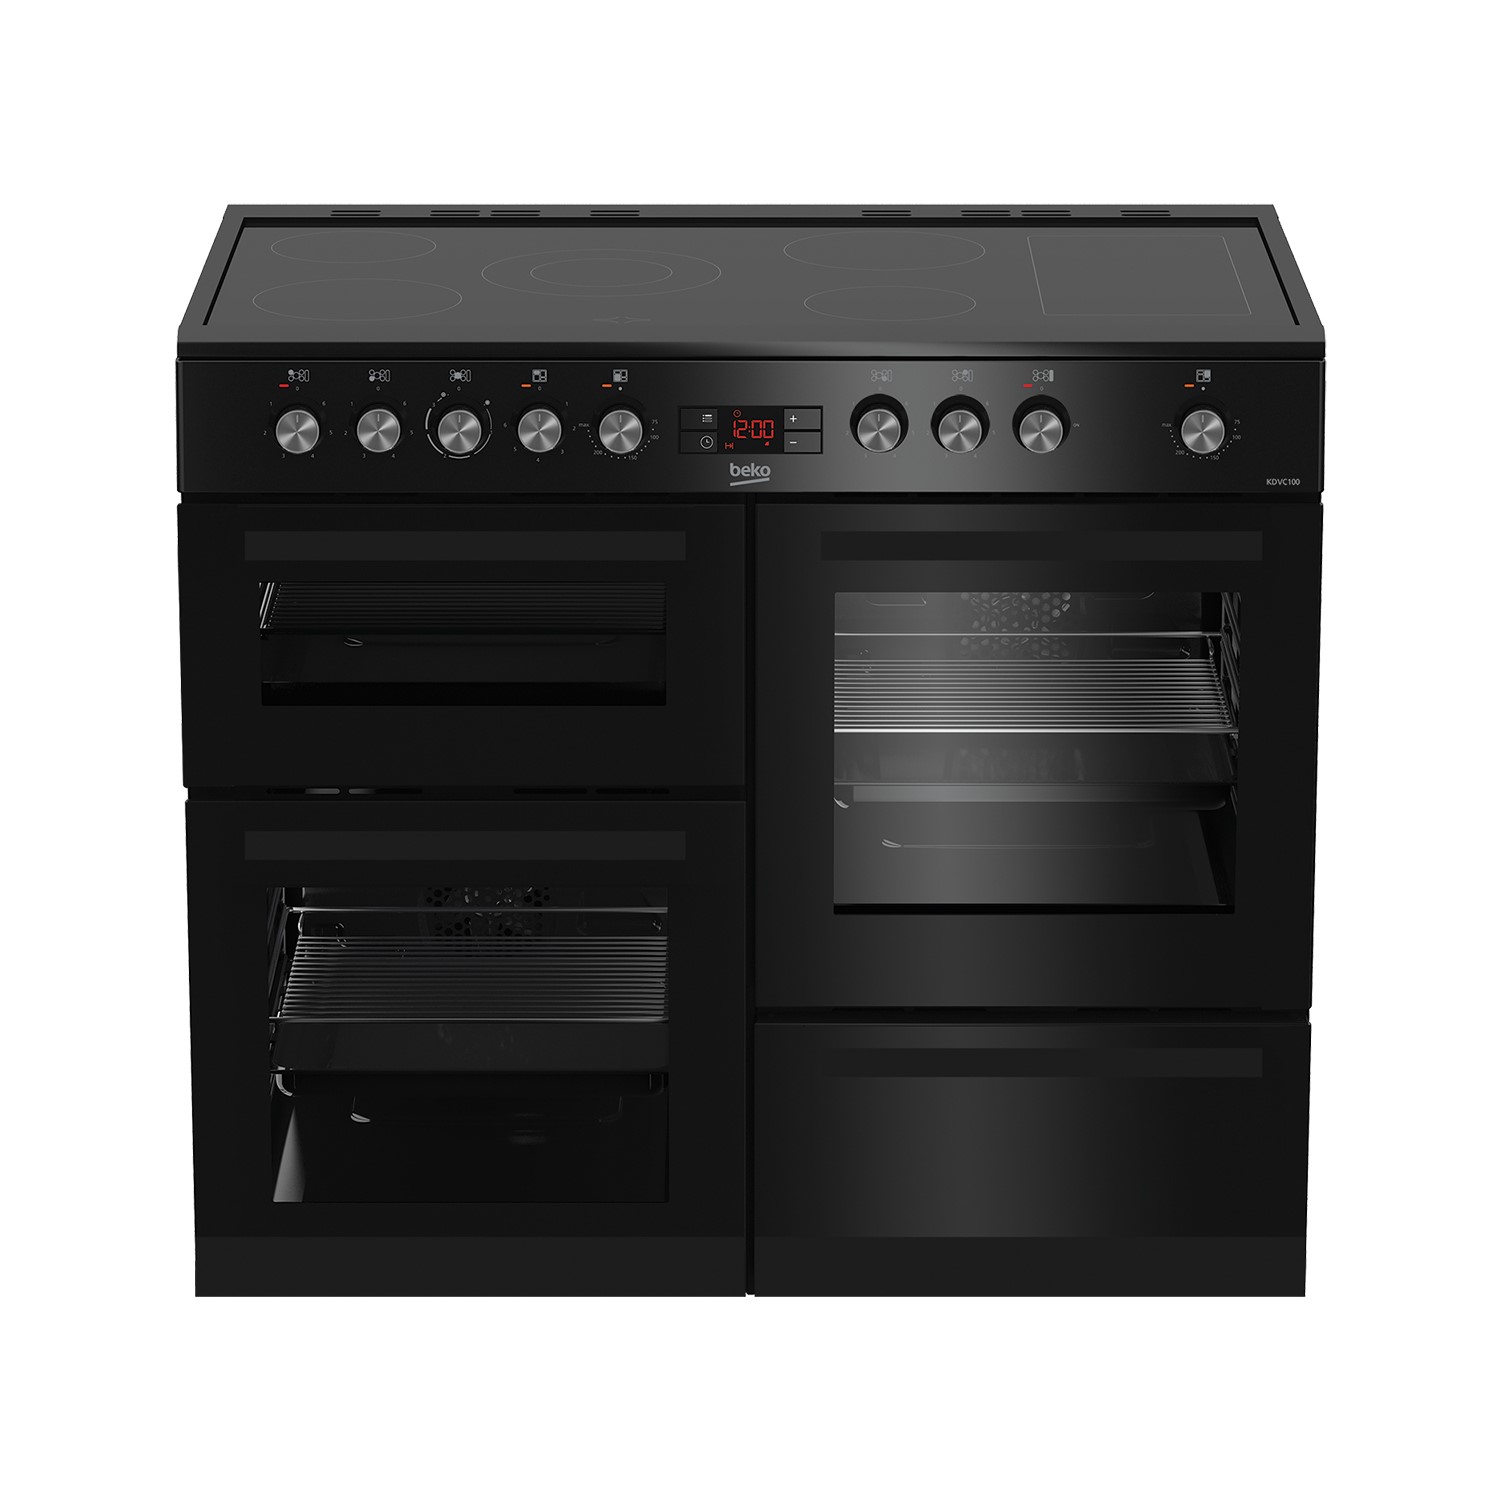 Beko KDVC100K 100cm Electric Range Cooker with Ceramic Hob - Black - A/A Rated